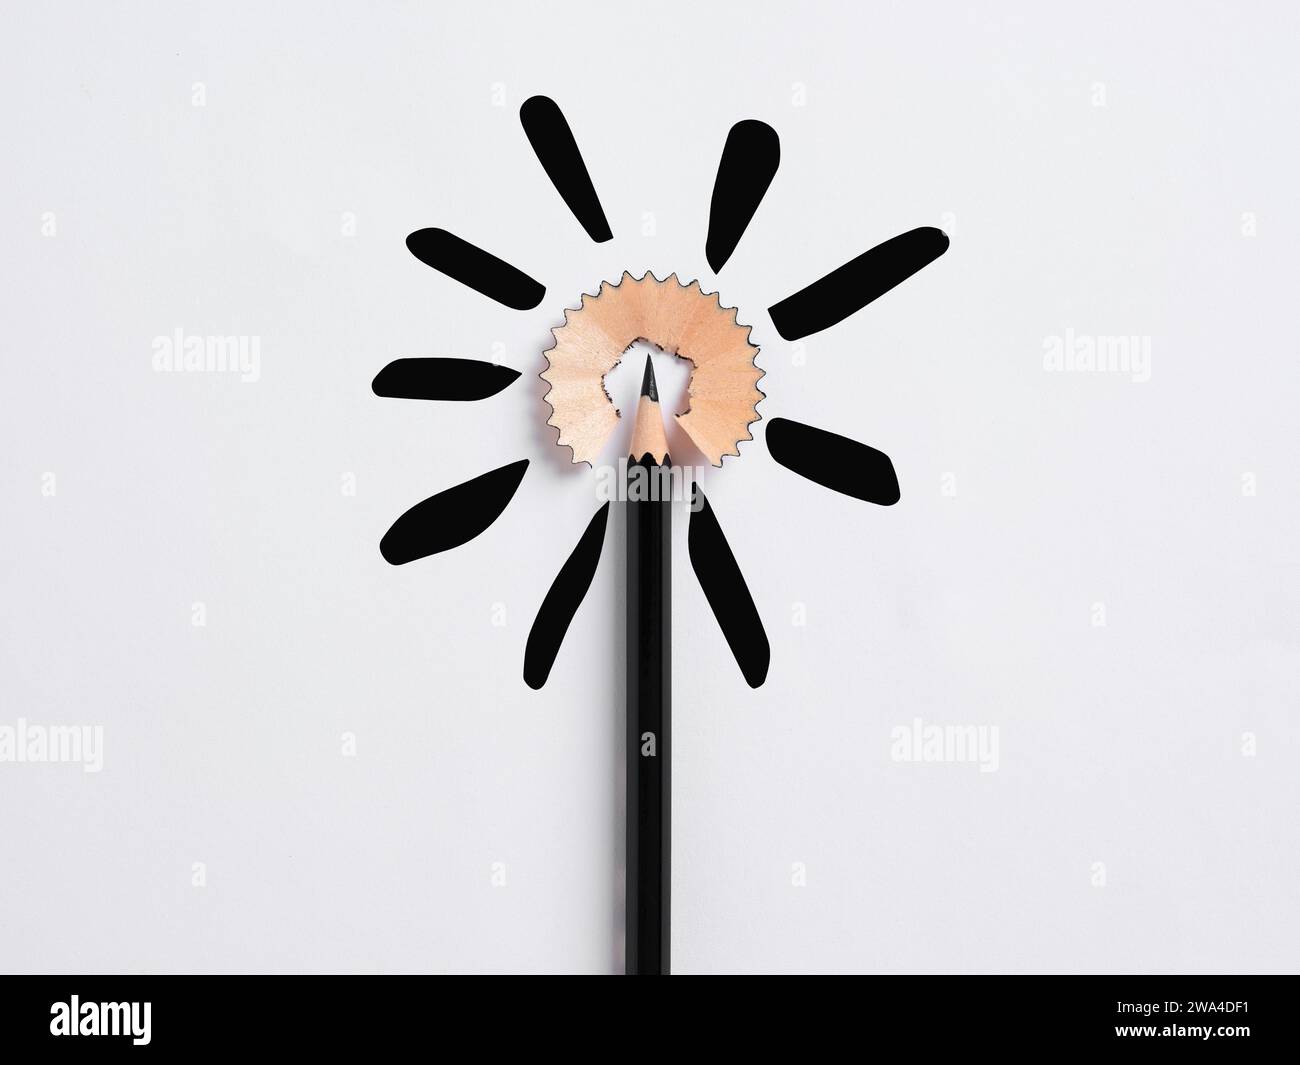 Education concept. Black pencil tip surrounded by its shaving representing a flower shape on white background. Stock Photo